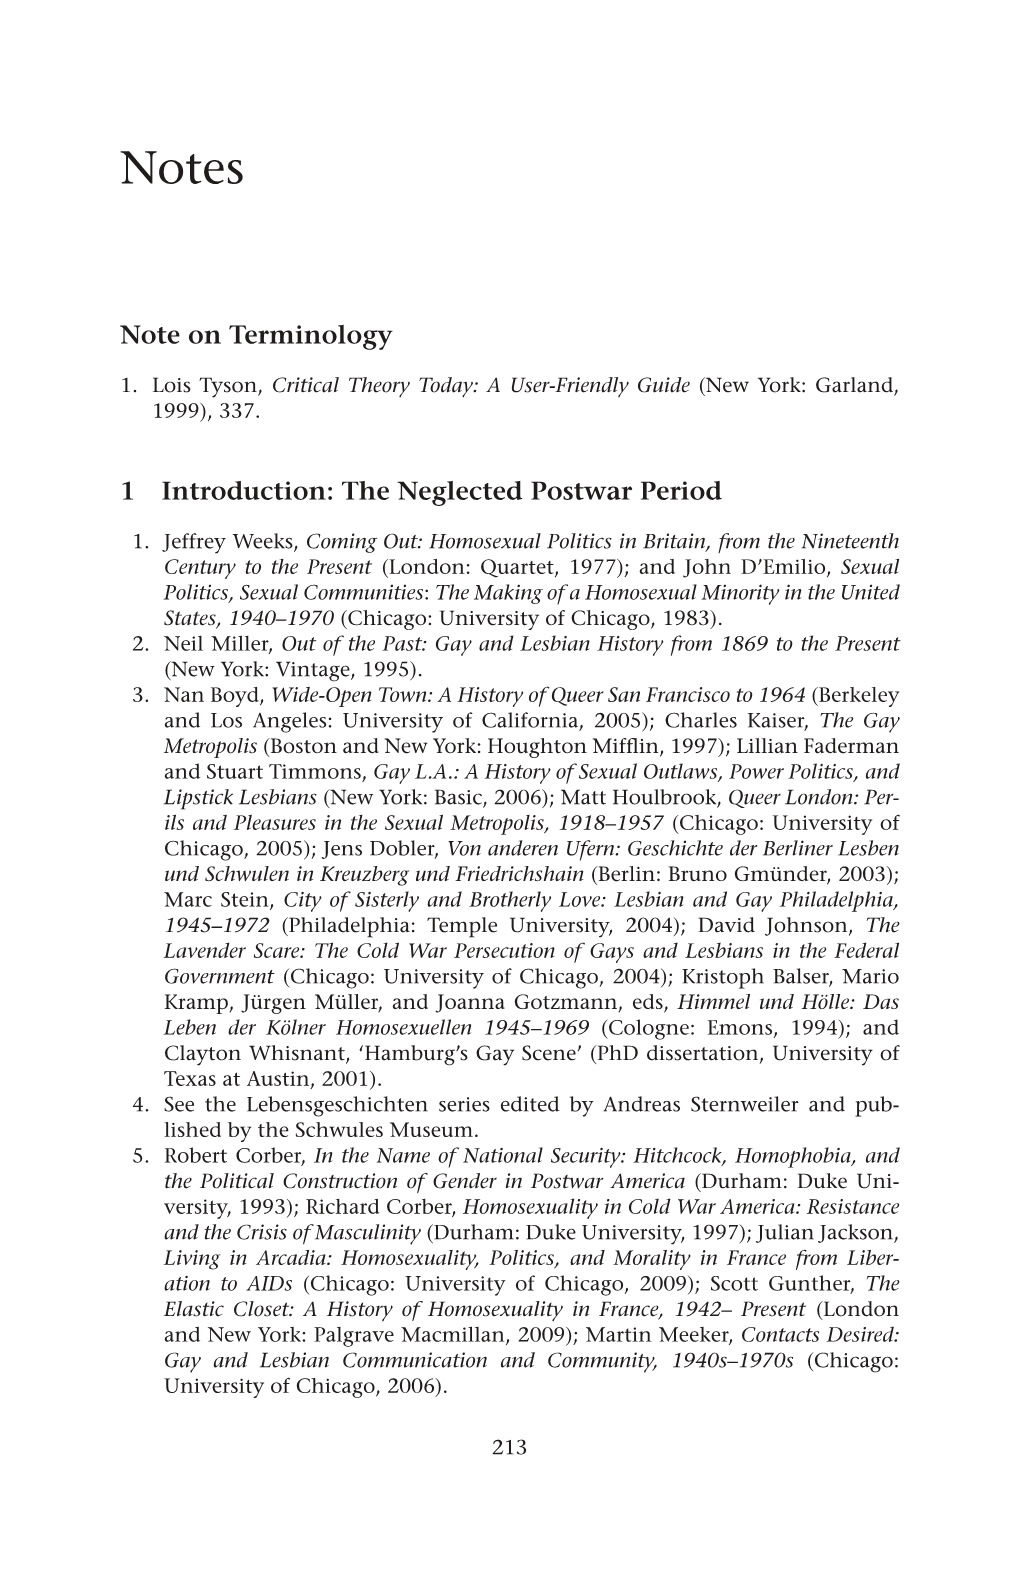 Note on Terminology 1 Introduction: the Neglected Postwar Period